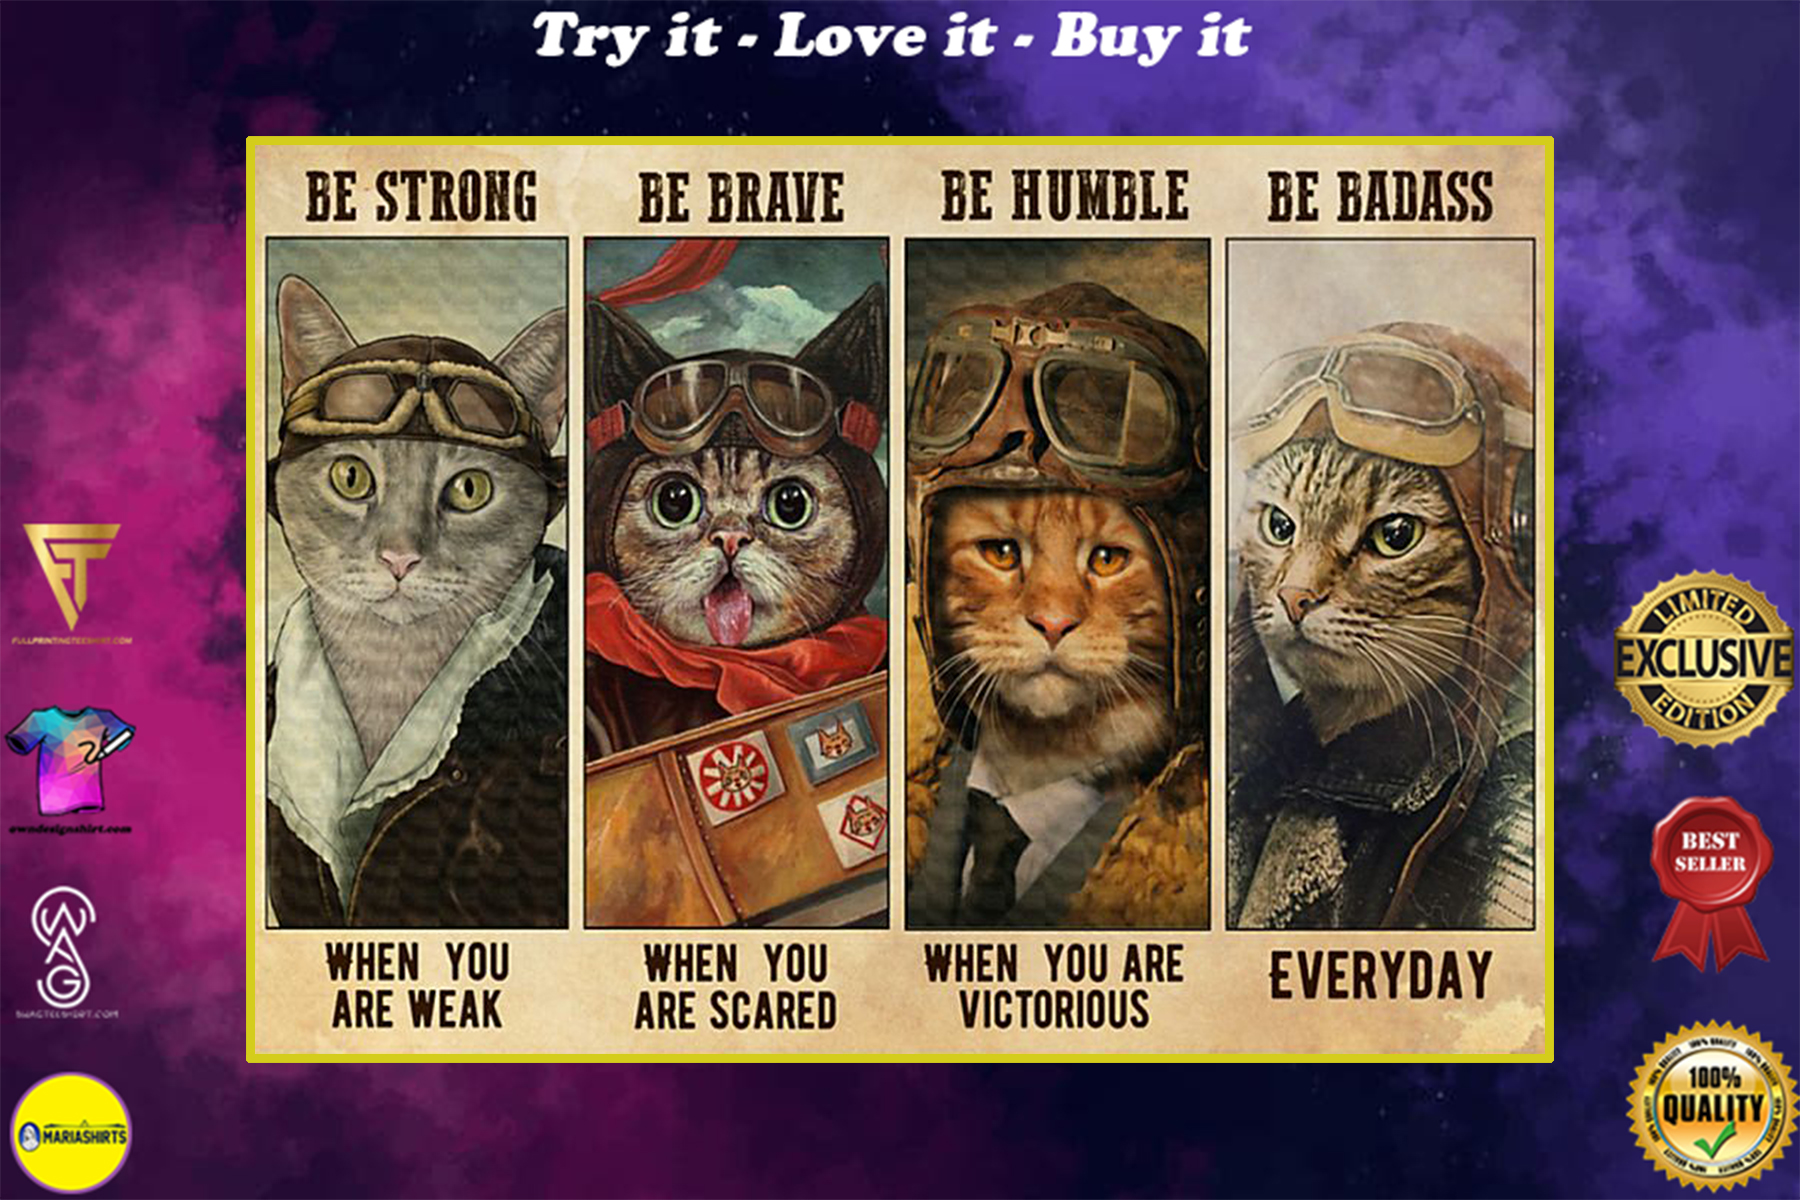 vintage cat pilot be strong when you are weak be brave when you are scared poster